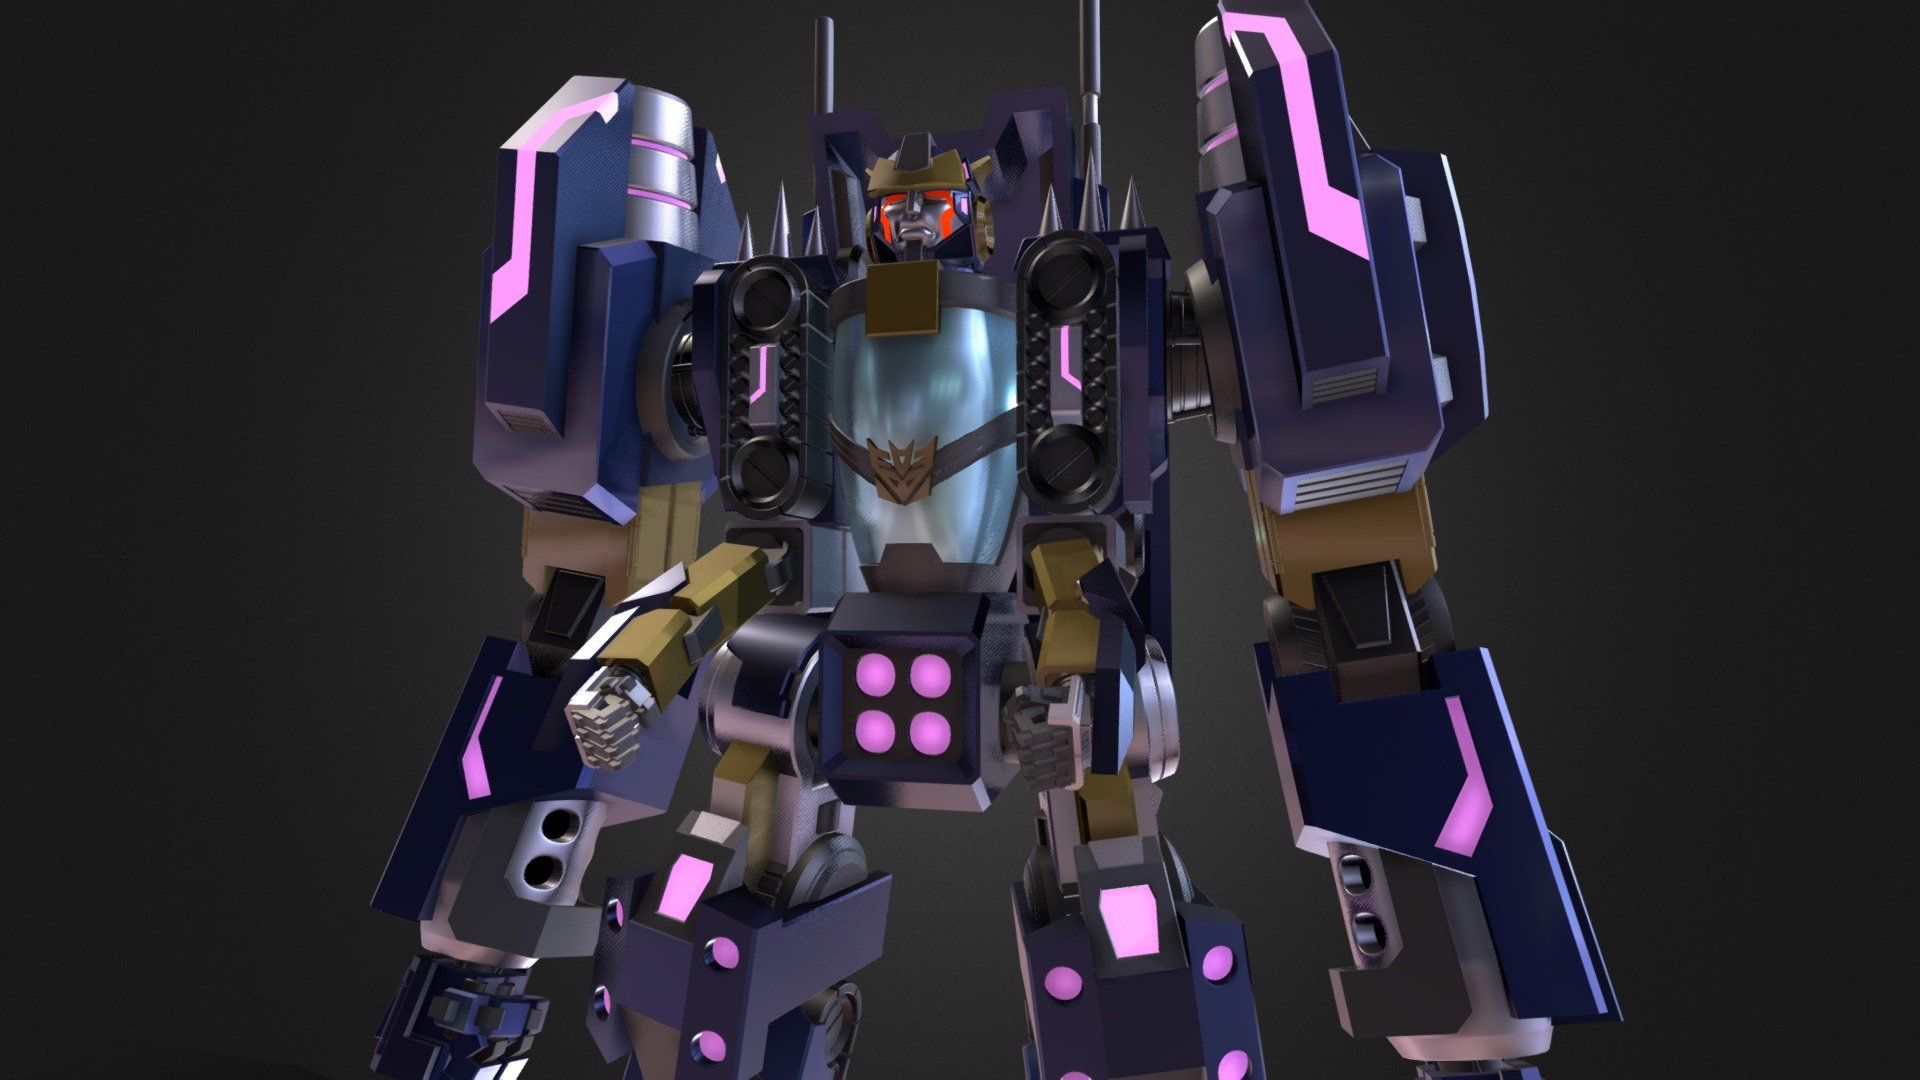 If you're interested in purchasing any of my models, contact me @ andrewdisaacs@yahoo.com

Based off the character from Transformers More Than Meets The Eye (MTMTE) from IDW Comics.

Made in 3DS Max by myself 3d model